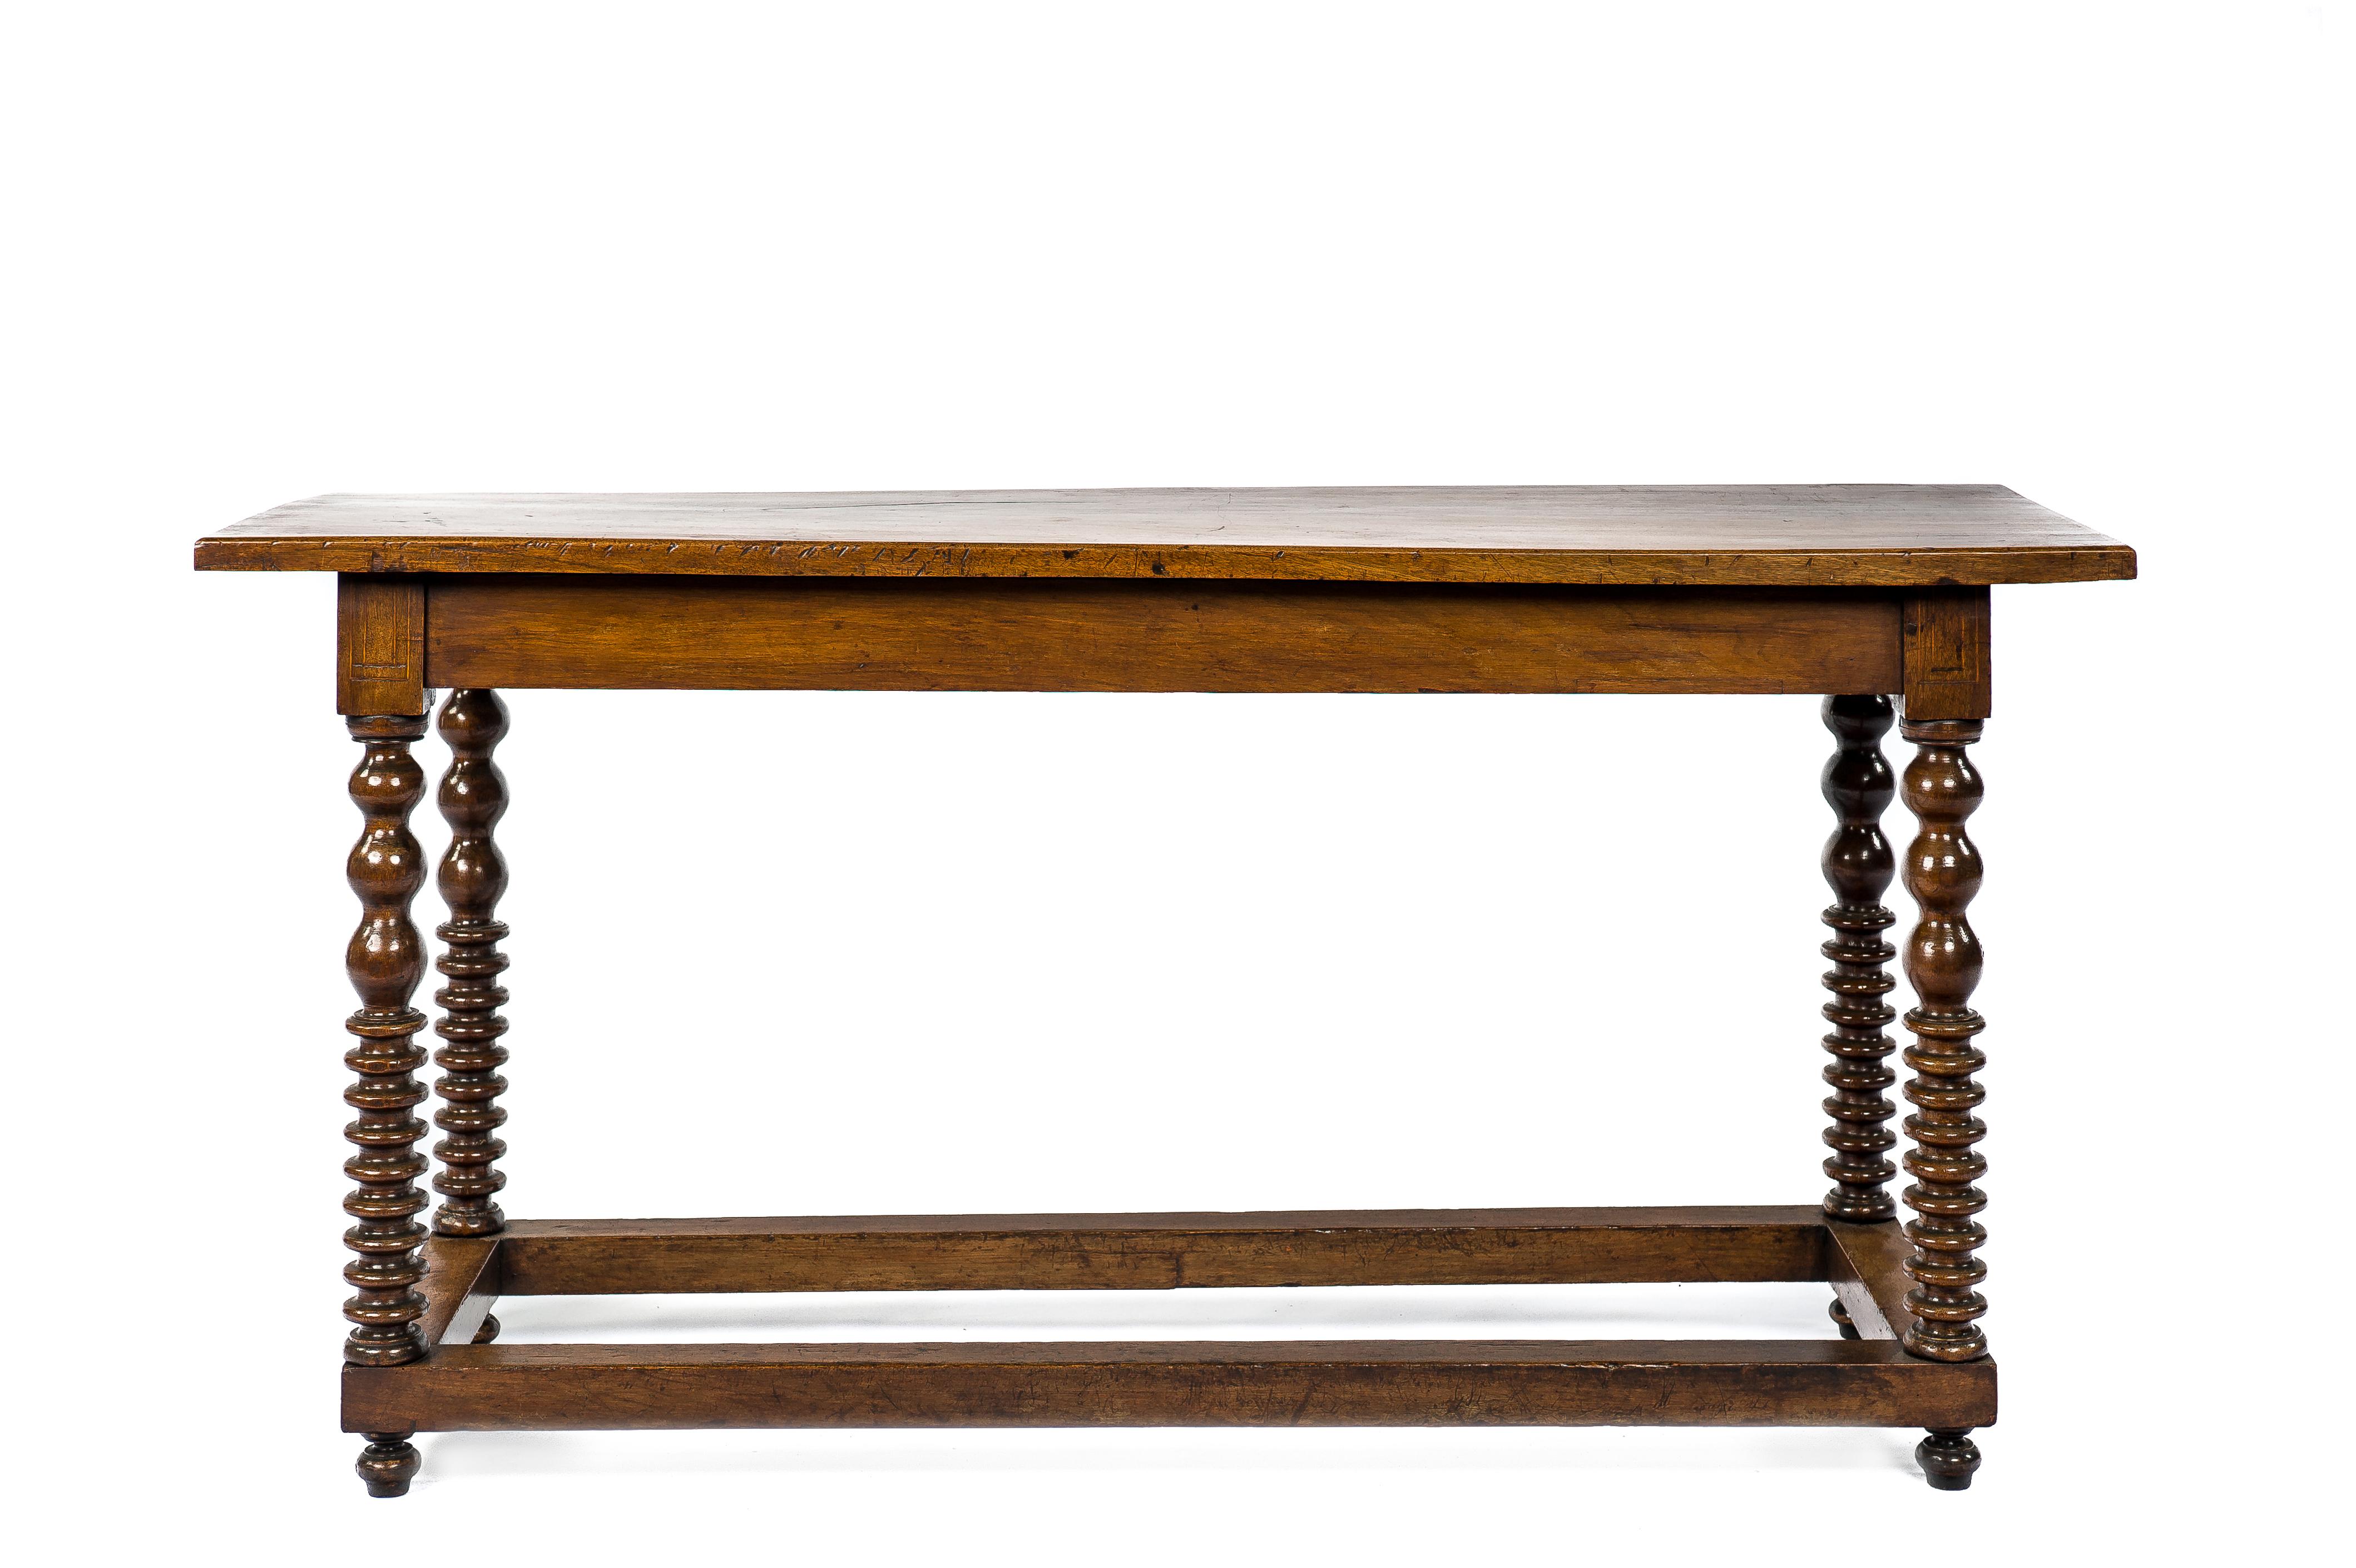 A rare Spanish walnut side table or wall table that was made in Spain in the mid 18th century. This table is unique because of its intricately turned legs. The legs' top block features a double square light wood inlaid pattern. The legs are joined